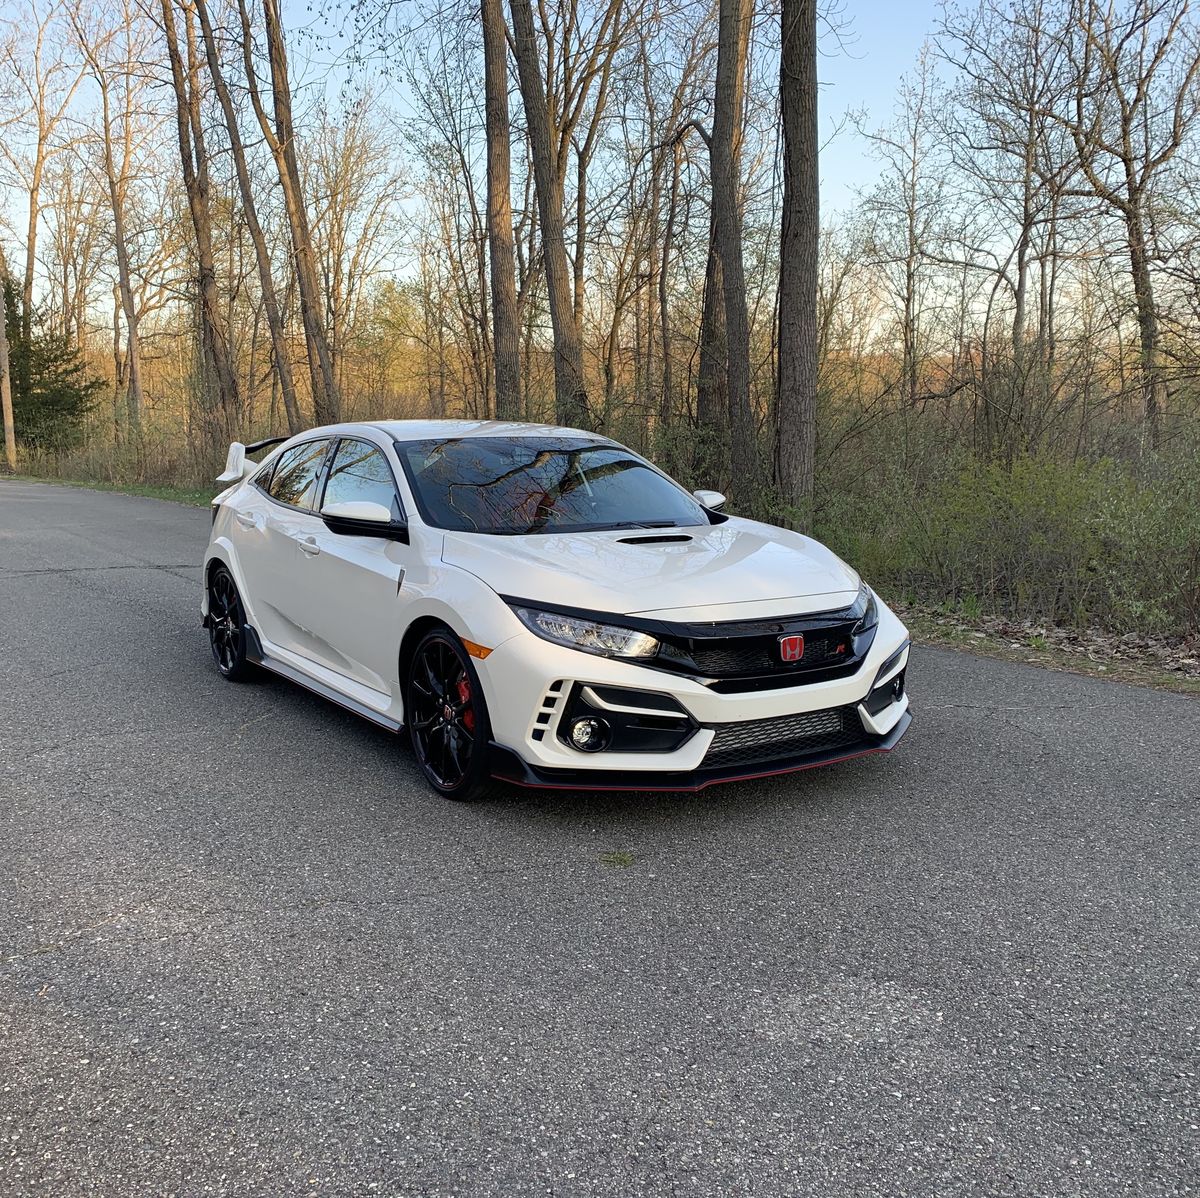 New 2024 Honda Civic Type R (HP): Pricing, Release Date & Full Specs